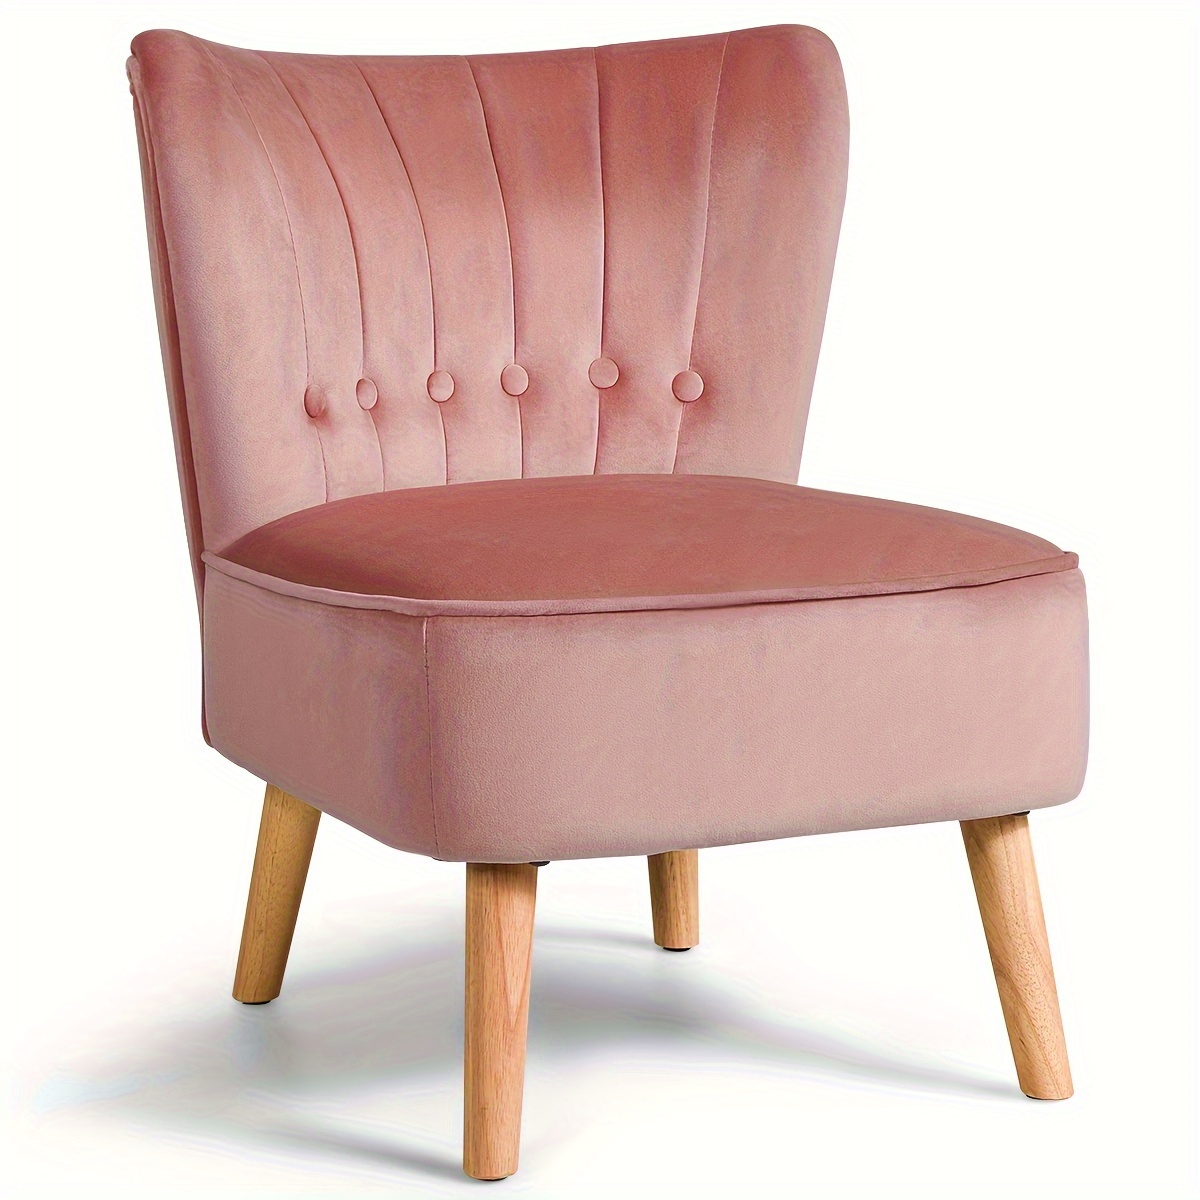 

1pc Armless Accent Chair, Tufted Velvet Leisure Chair Single Sofa Upholstered Pink